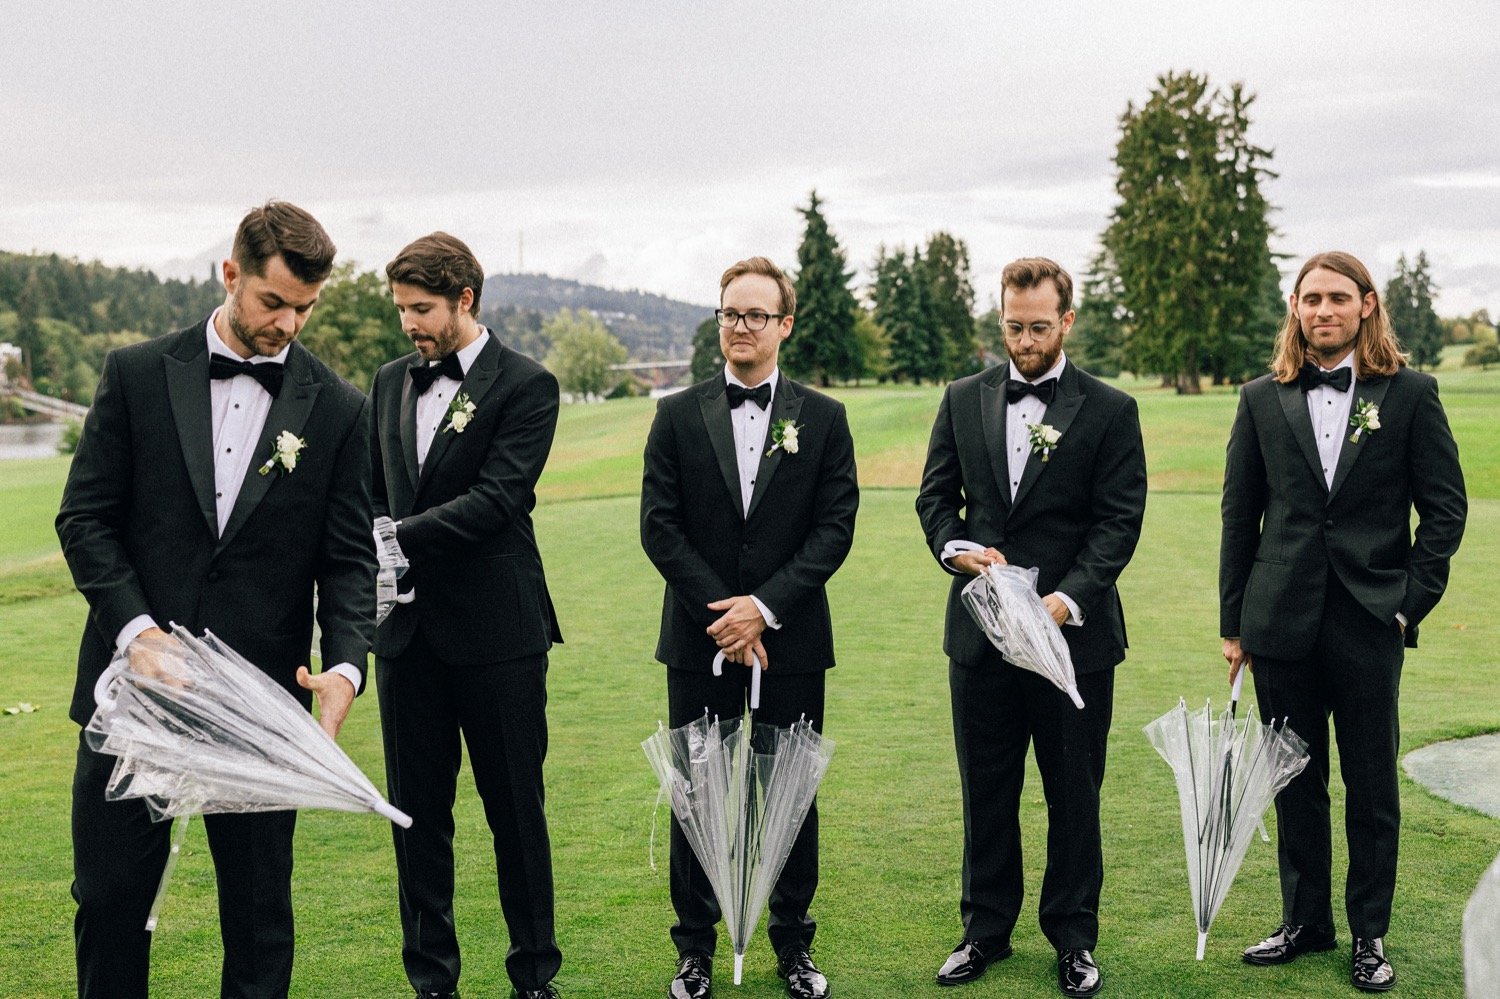  Five groomsmen in black suits hold clear umbrellas during wedding ceremony 